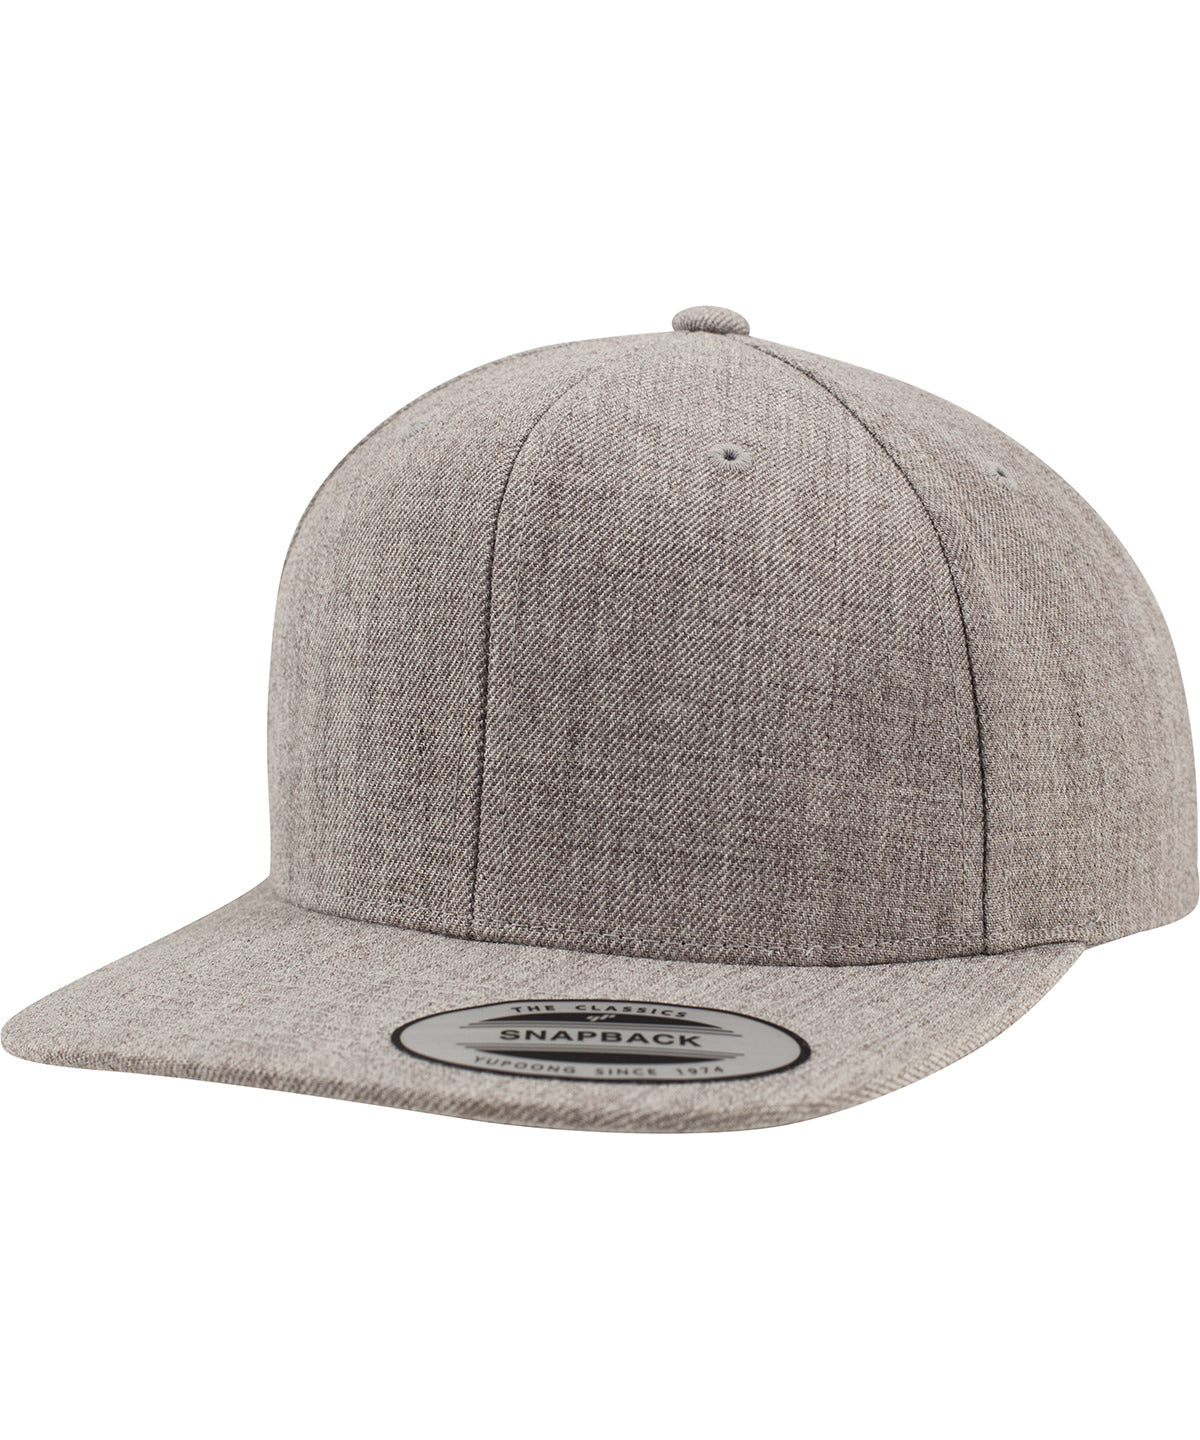 Heather/Heather - The classic snapback (6089M) Caps Flexfit by Yupoong Headwear, Must Haves, New Colours for 2023, Rebrandable, Streetwear Schoolwear Centres